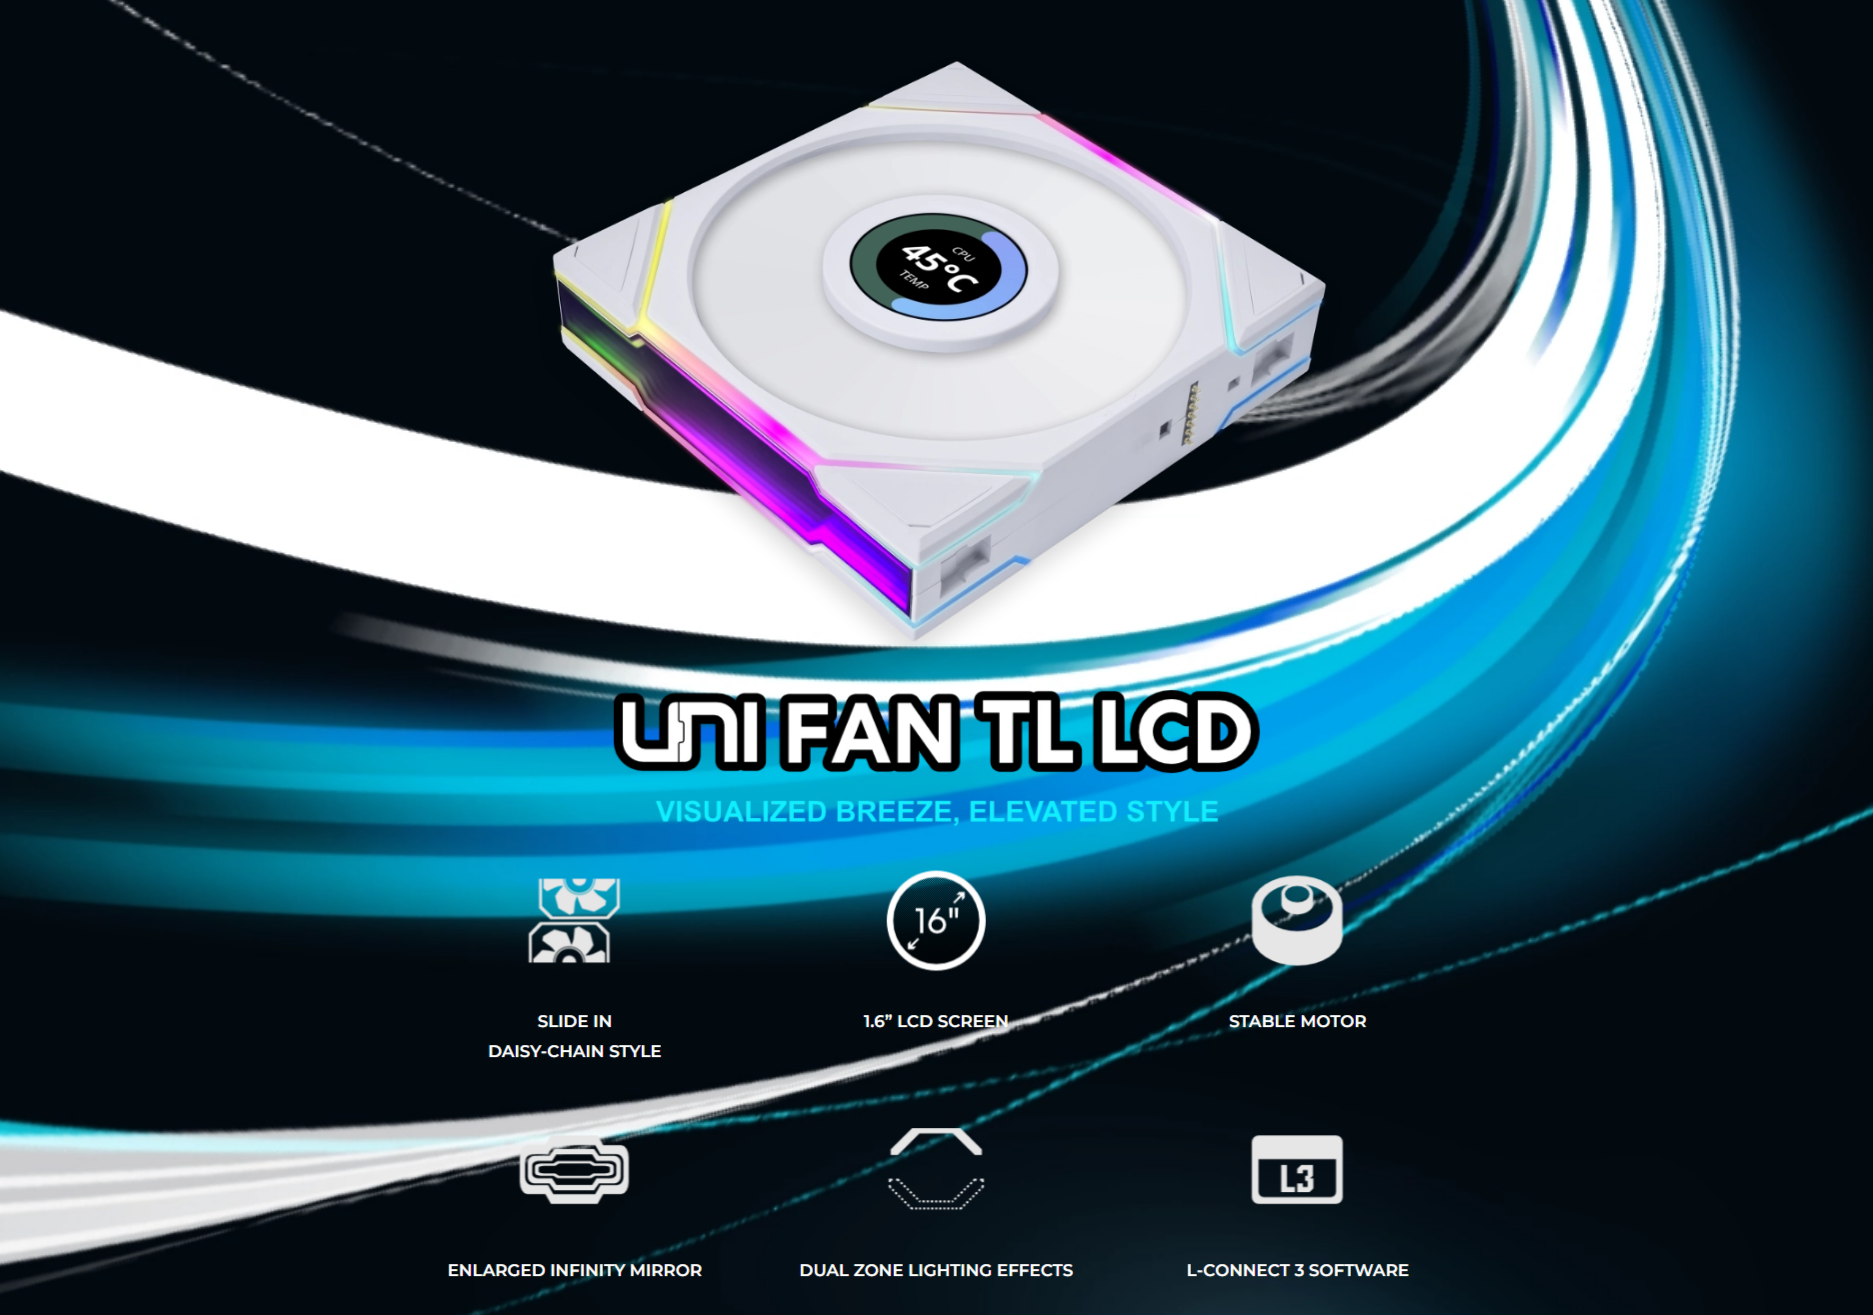 A large marketing image providing additional information about the product Lian Li UNI Fan TL LCD 140 Reverse Blade 140mm Fan Single Pack - White - Additional alt info not provided